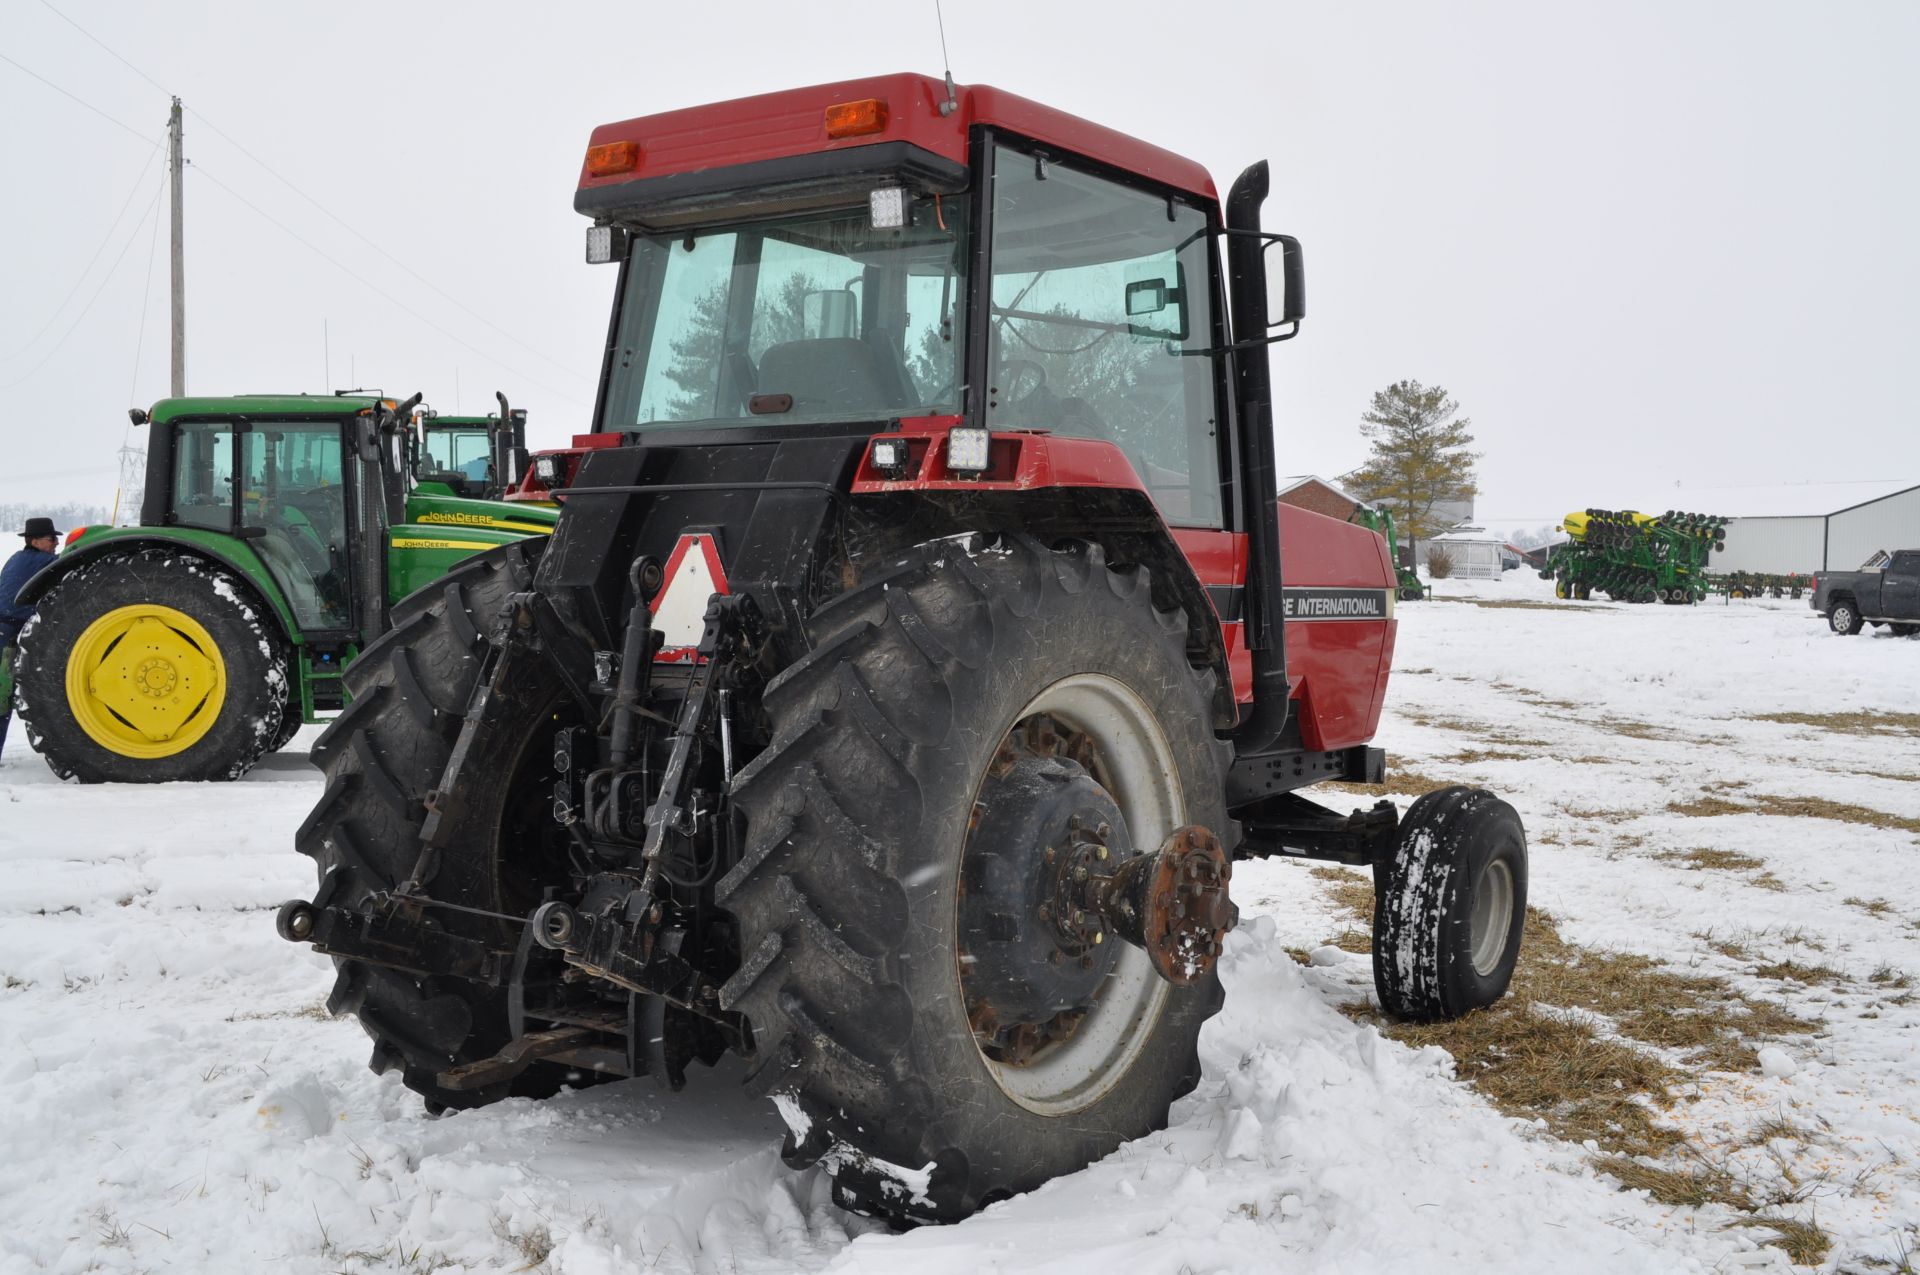 Case IH 7120 tractor, 2WD, power shift, 18.4 R 42 tires, 540/1000 PTO, 3 hyd remotes, 3 pt, shows - Image 4 of 37